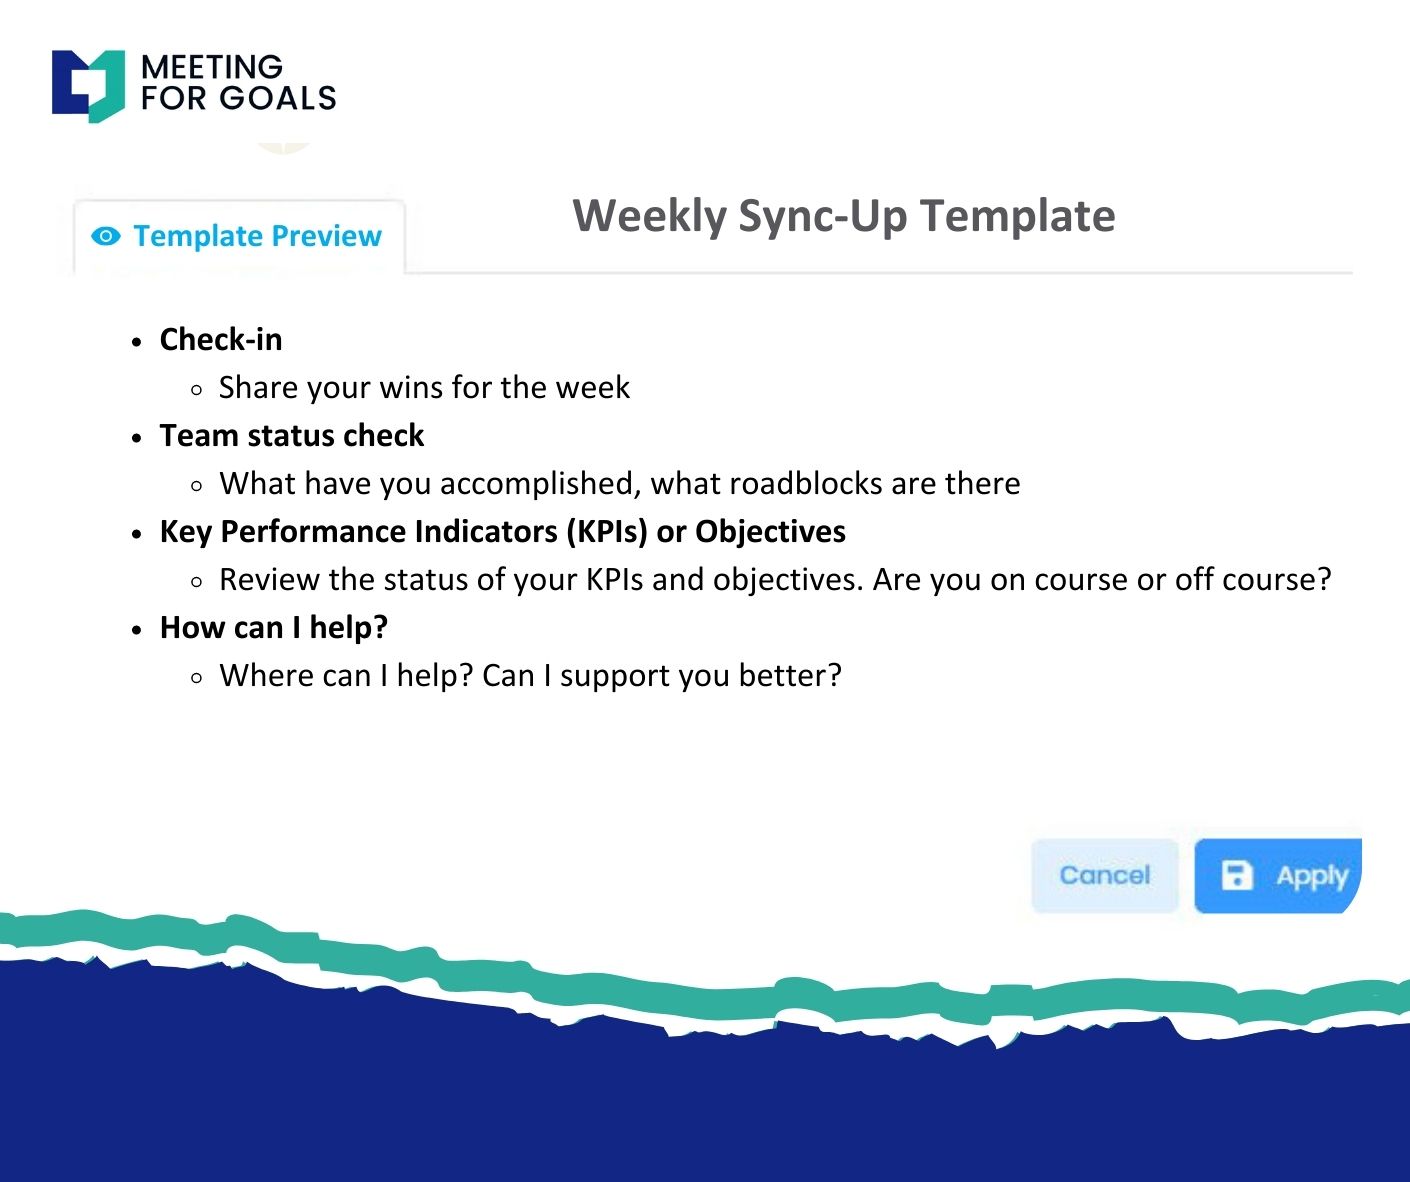 Weekly Sync-Up Meeting Template